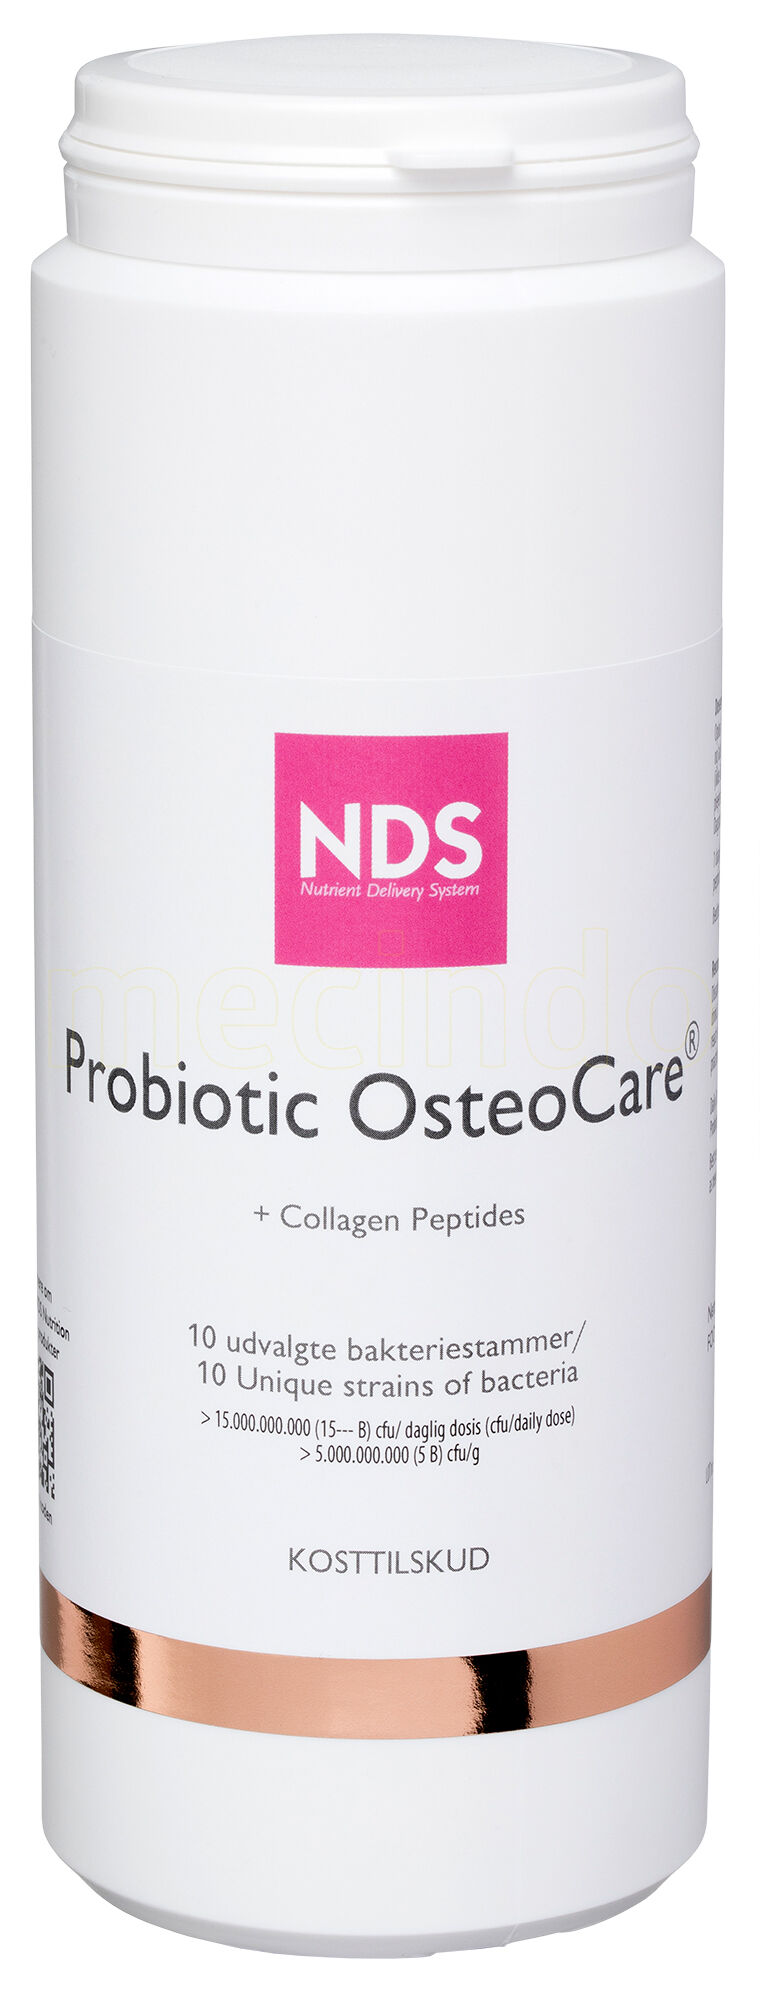 NDS Probiotic Osteocare - 250 g